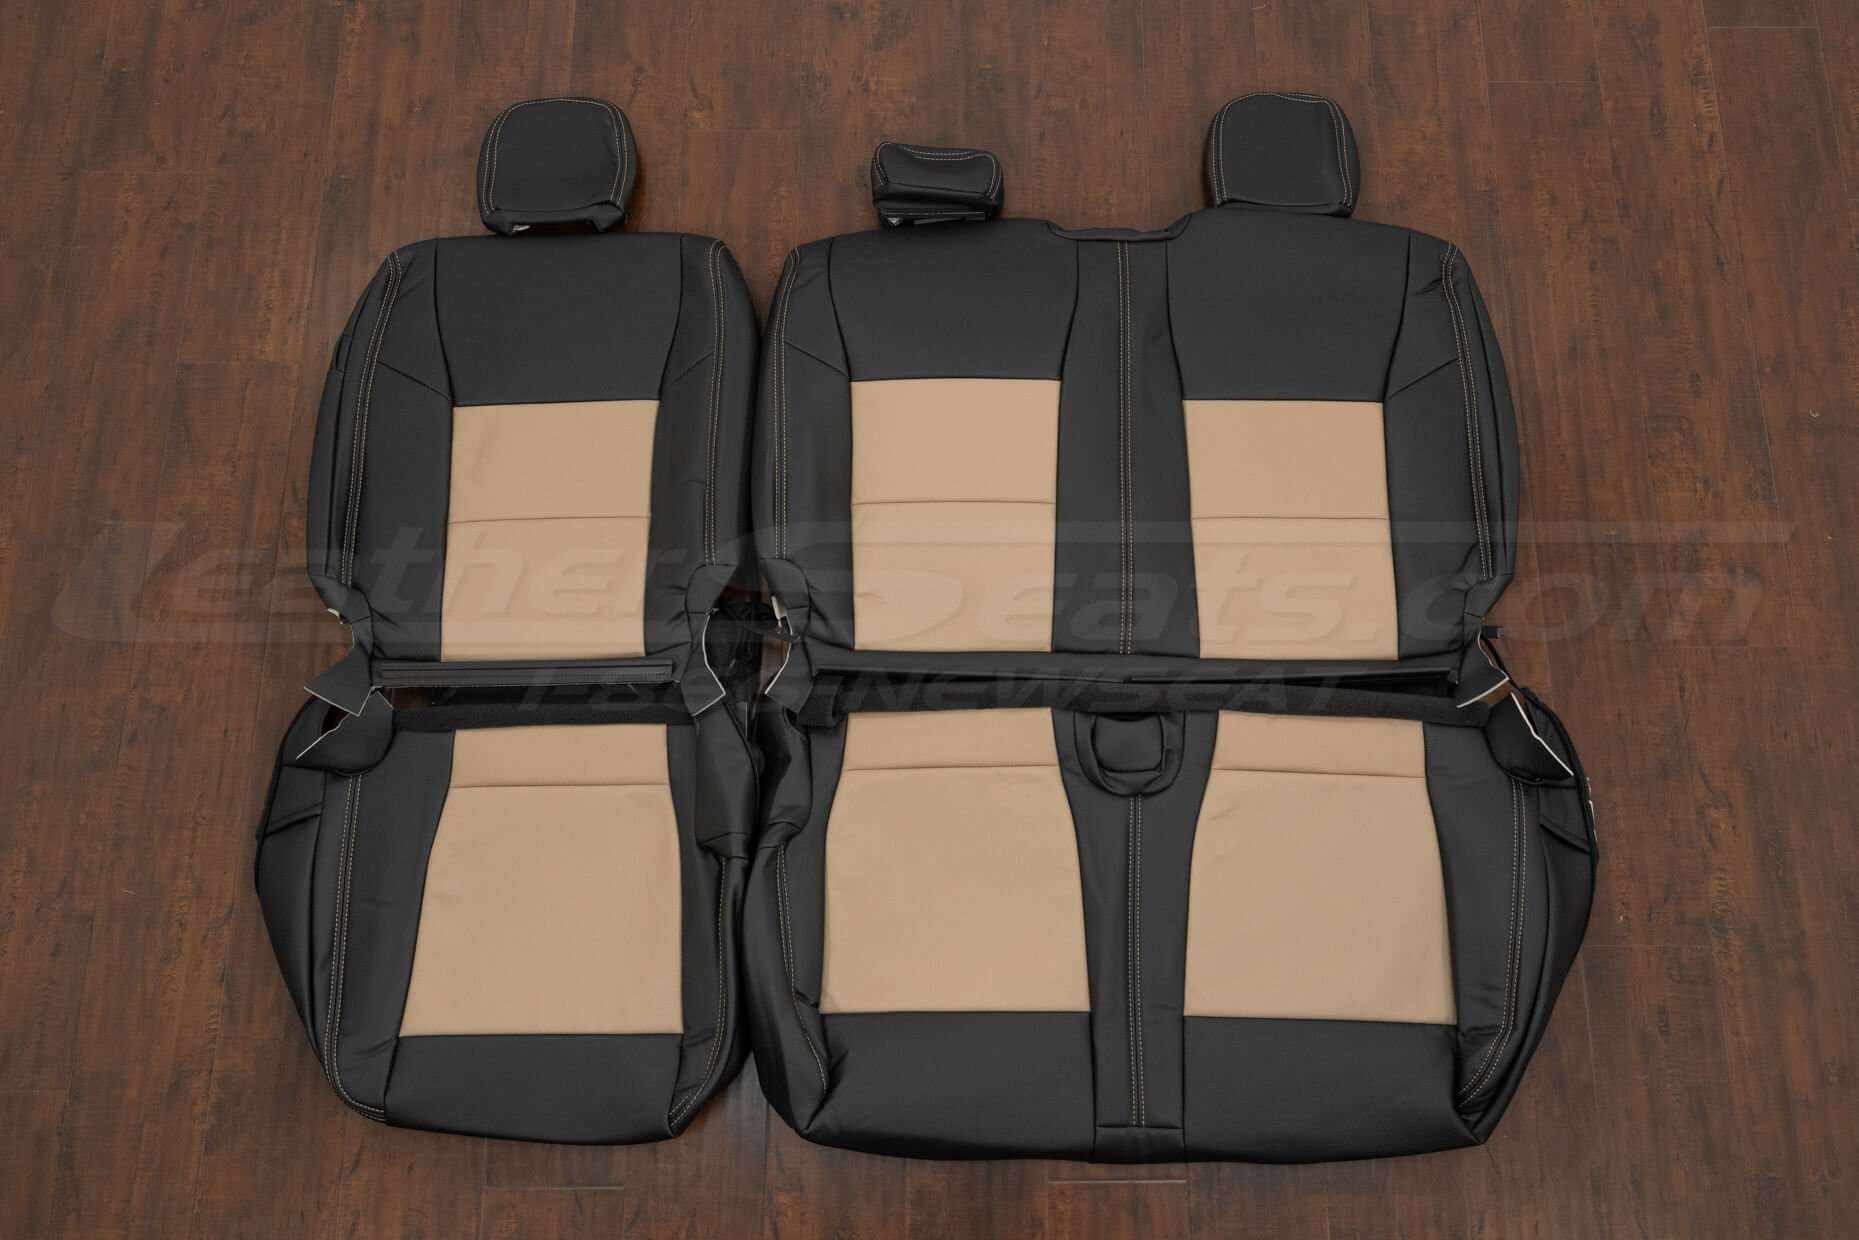 Ford F-250 CrewCab XLT Leather Seat Upholstery Kit. - Black/Bisque - Rear seat upholstery